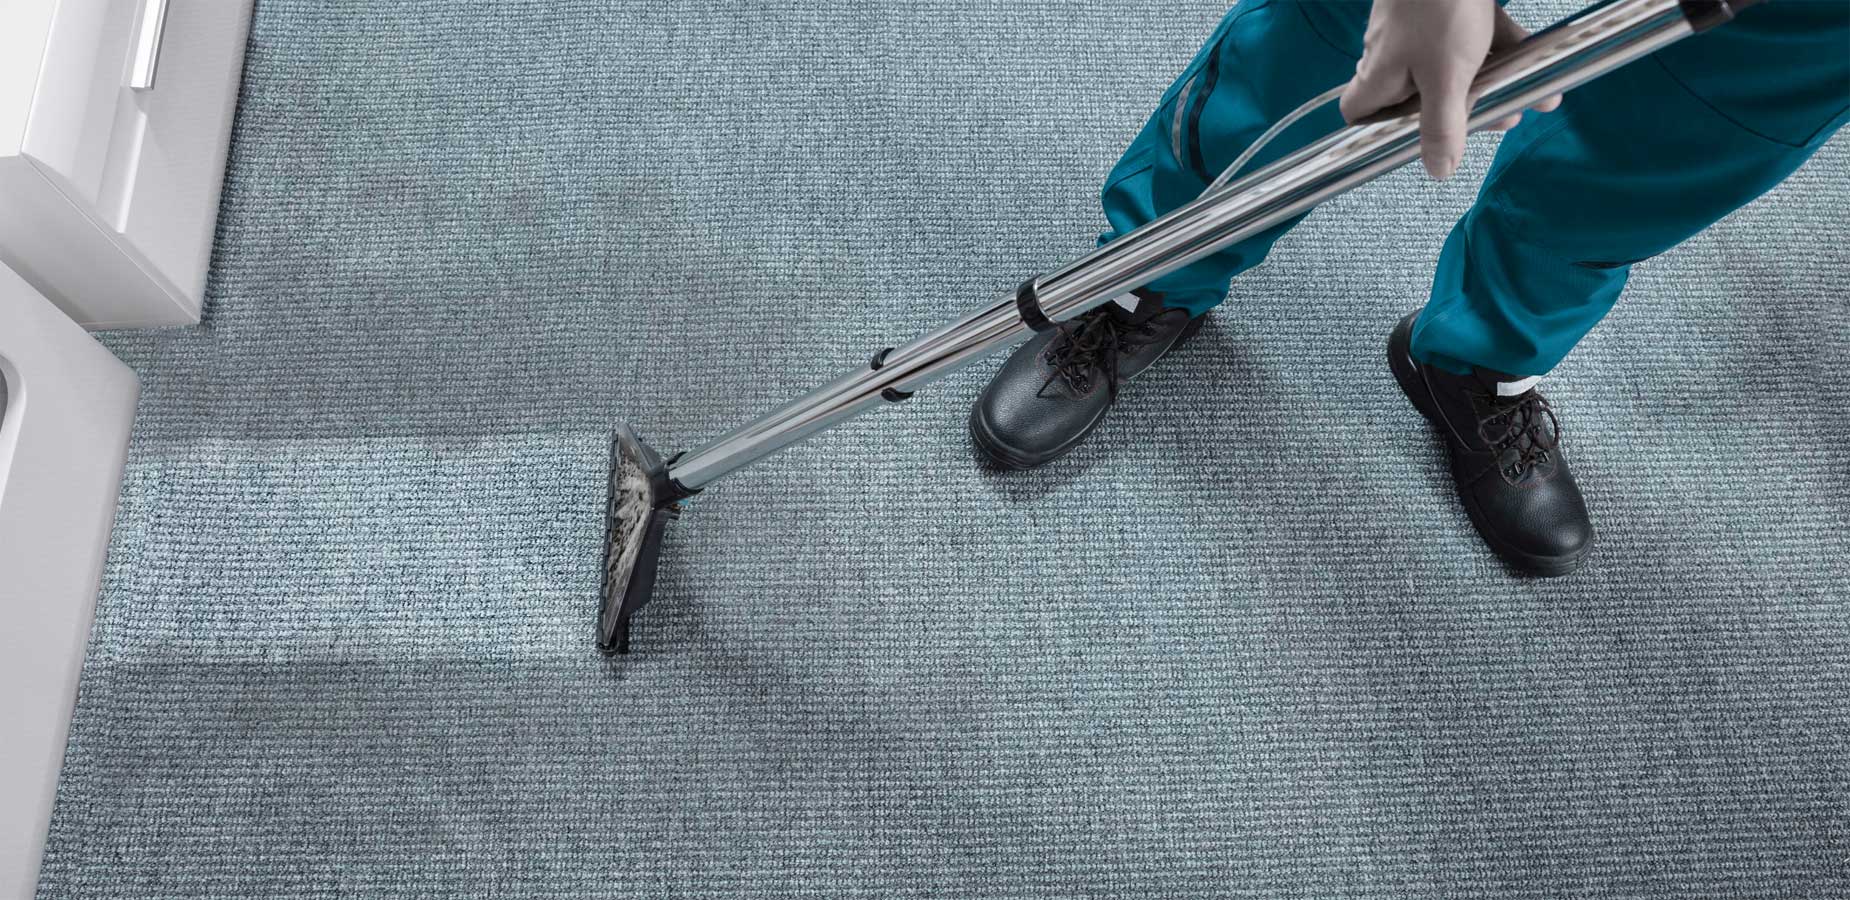 Carpet Tile Upholstery Cleaning South Jersey | American Mobile Clean